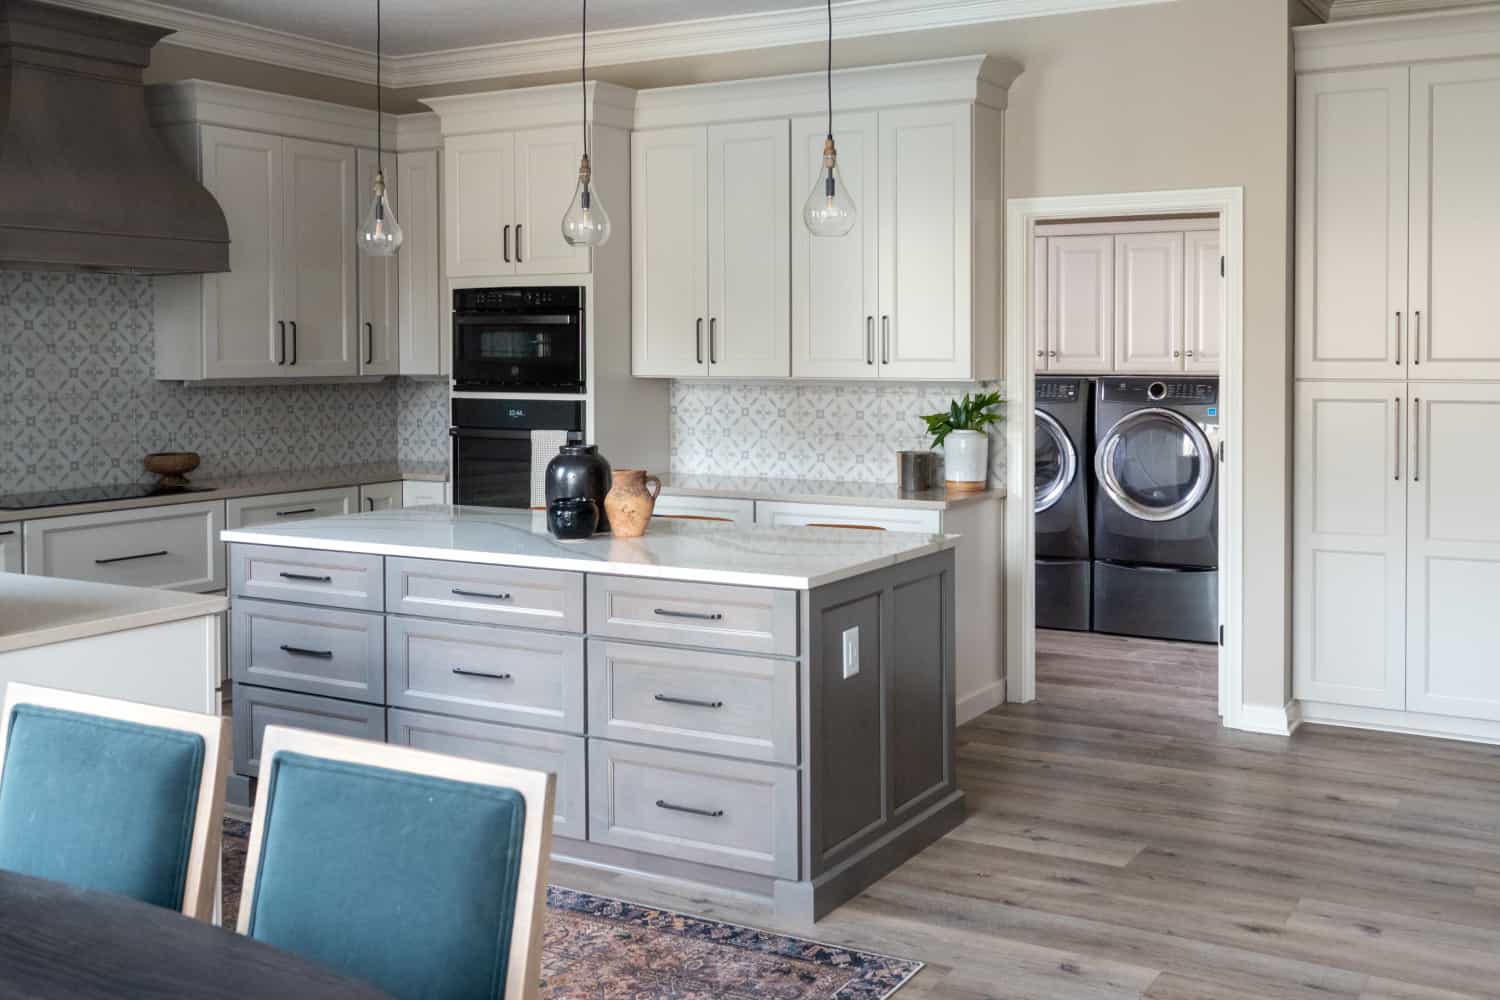 Nicholas Design Build | A remodeled kitchen with white cabinets and a center island.